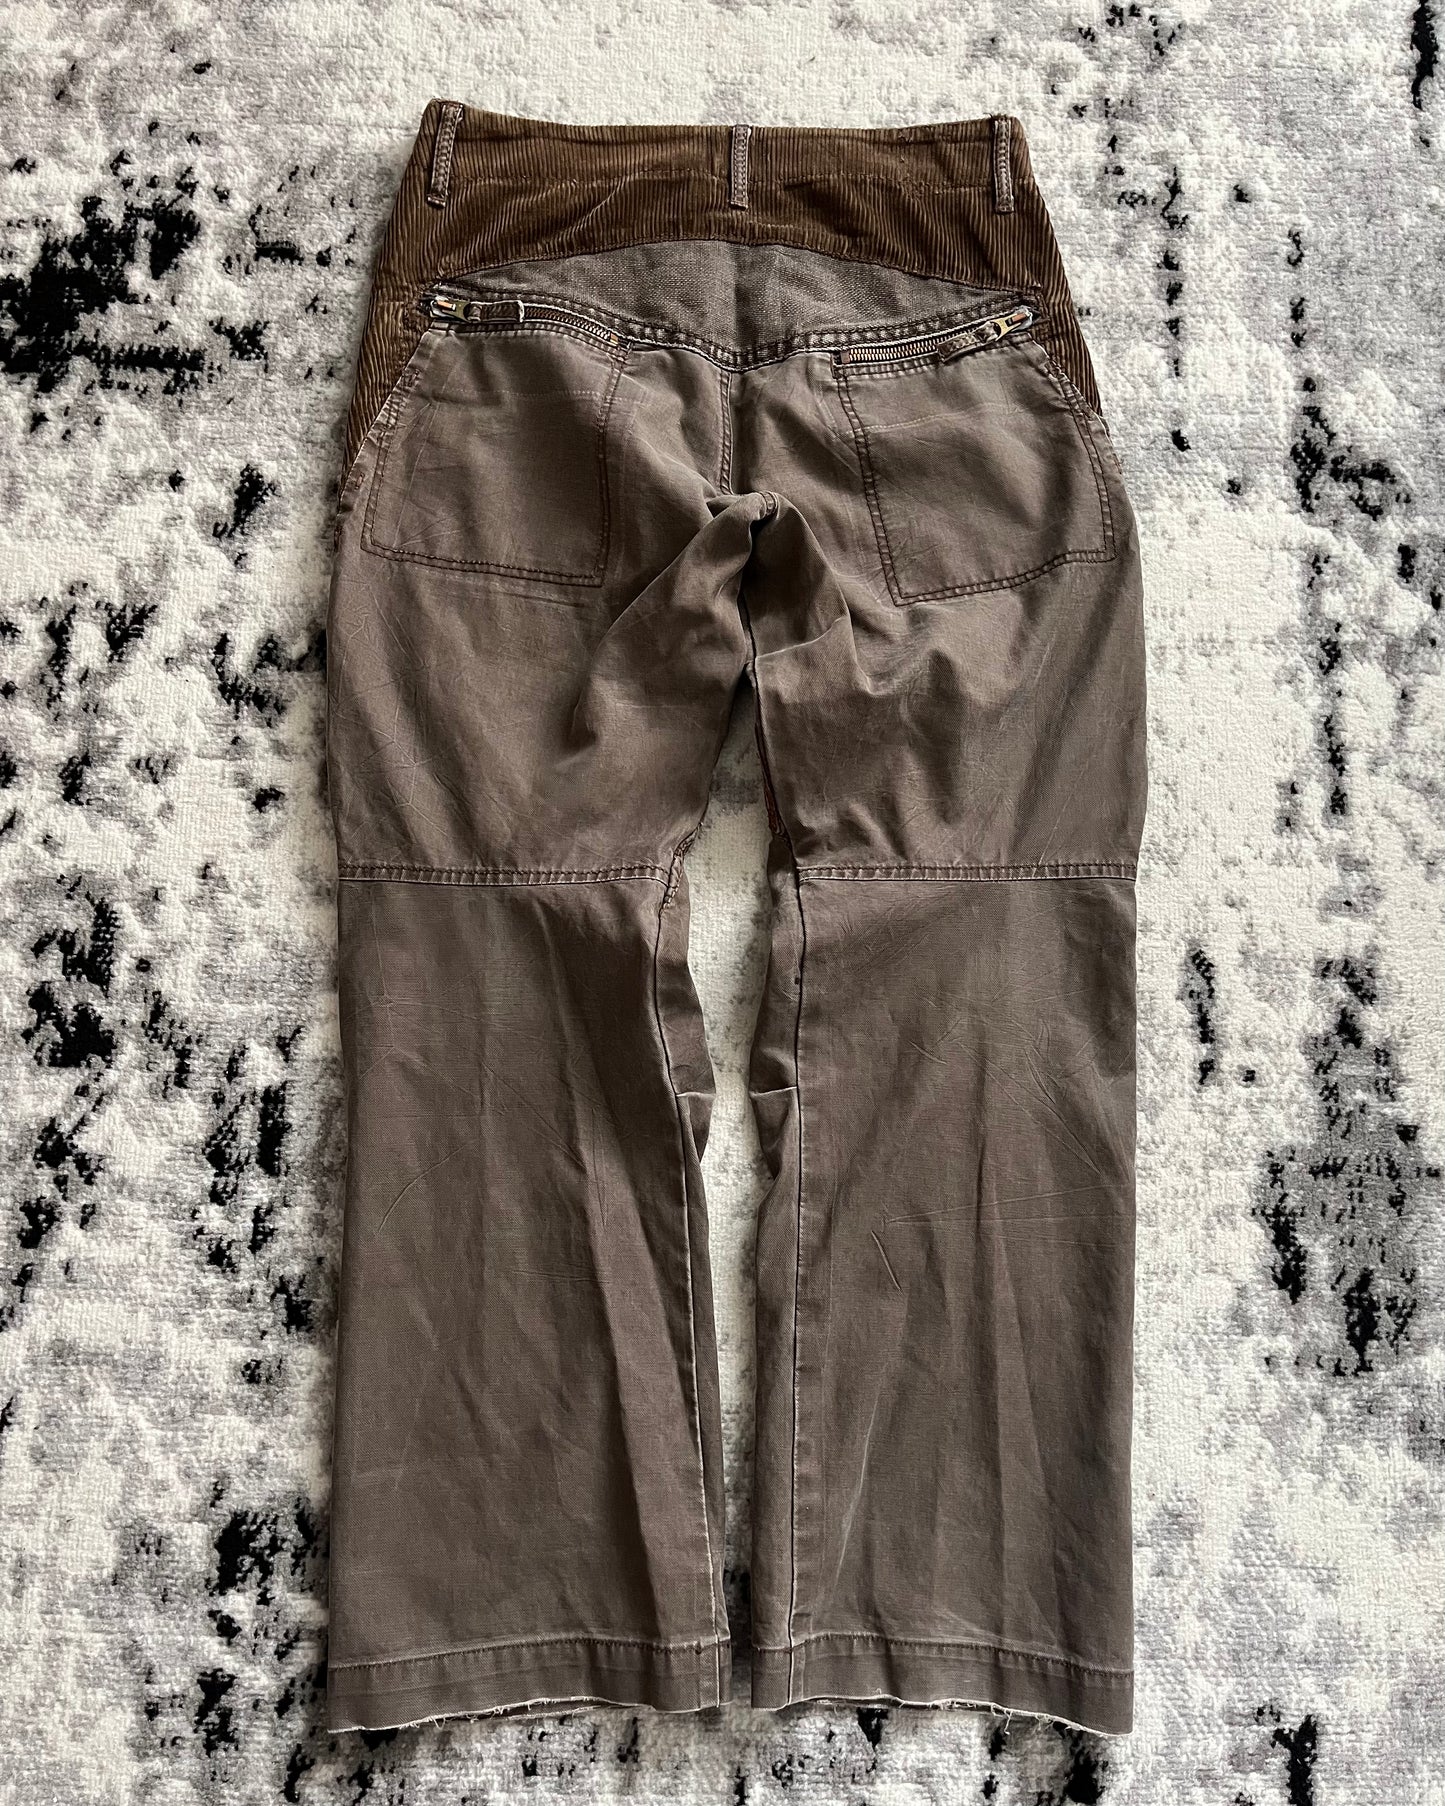 00s' Marithe François Girbaud Dual Whimsy Double-Waisted Brown Pants (L)